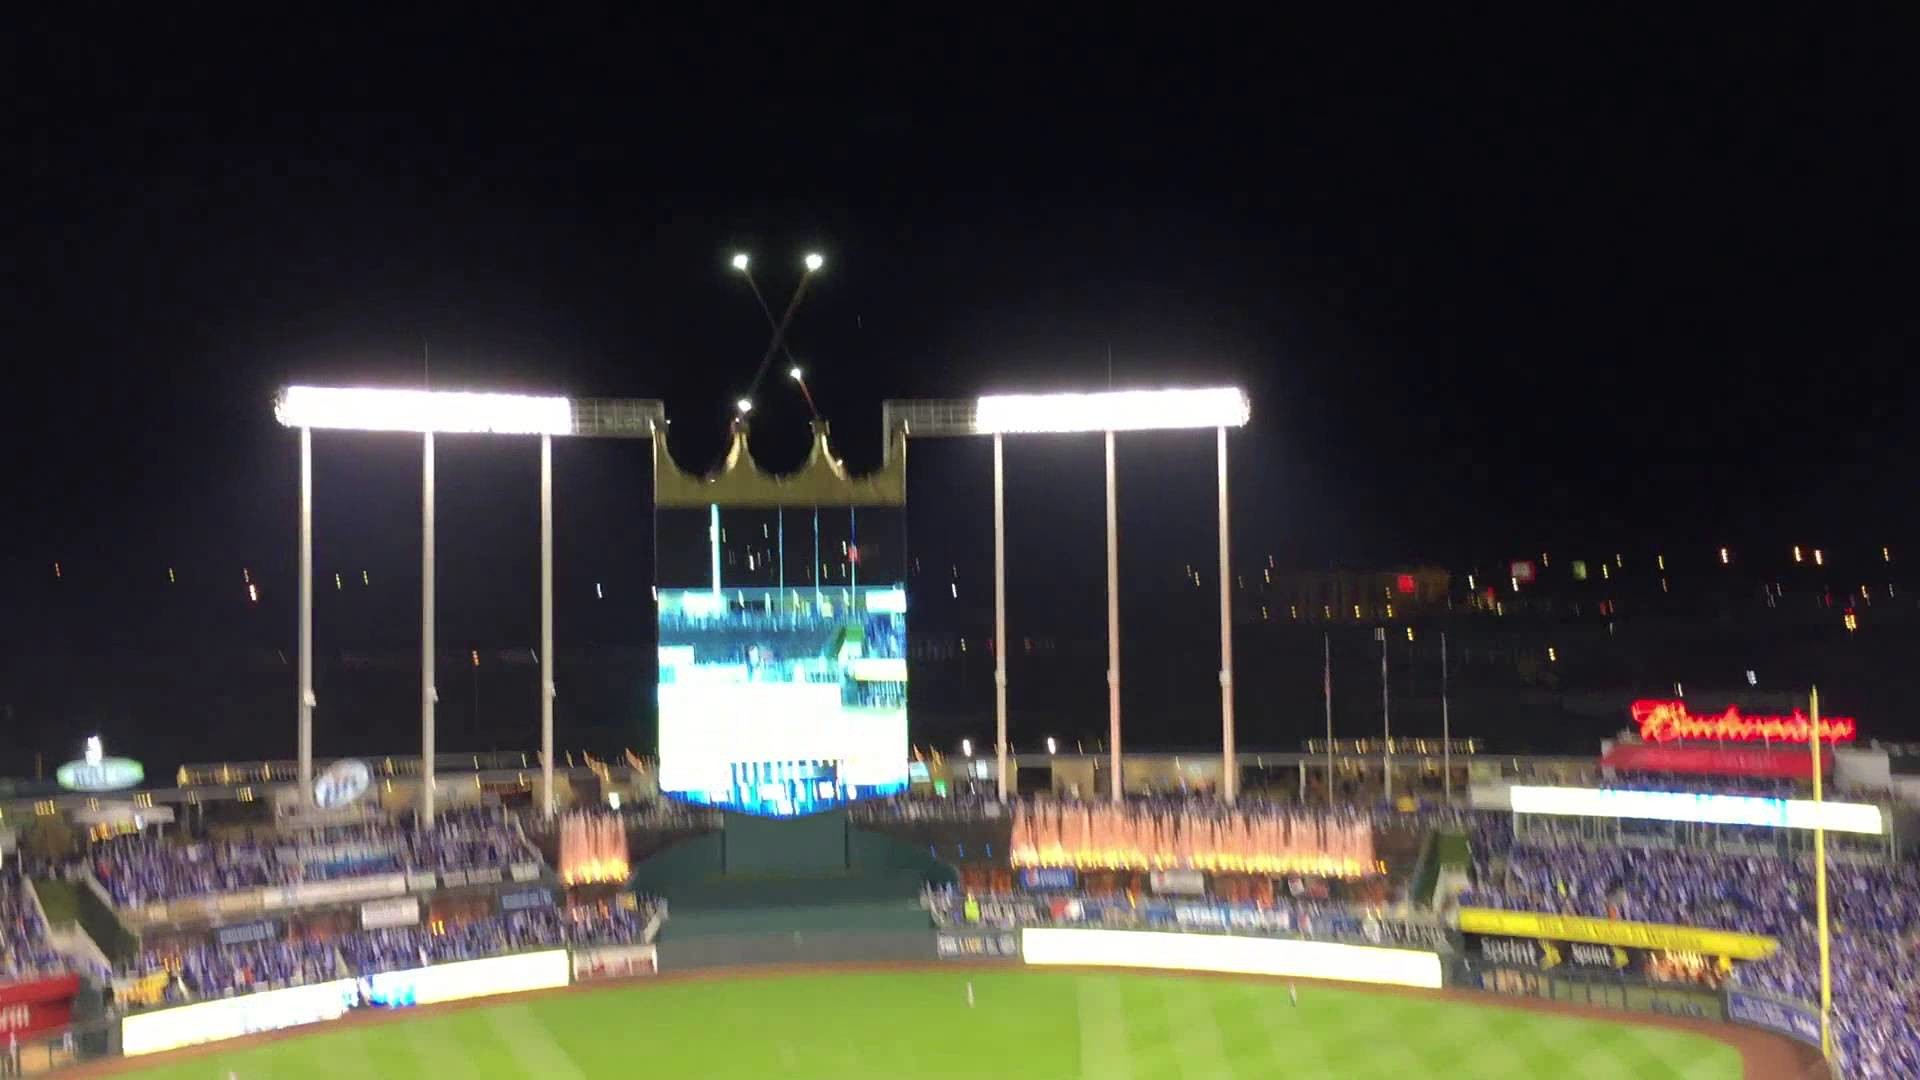 1920x1080 Mike Moustakas Game 6 Home Run World Series Royals KC HD